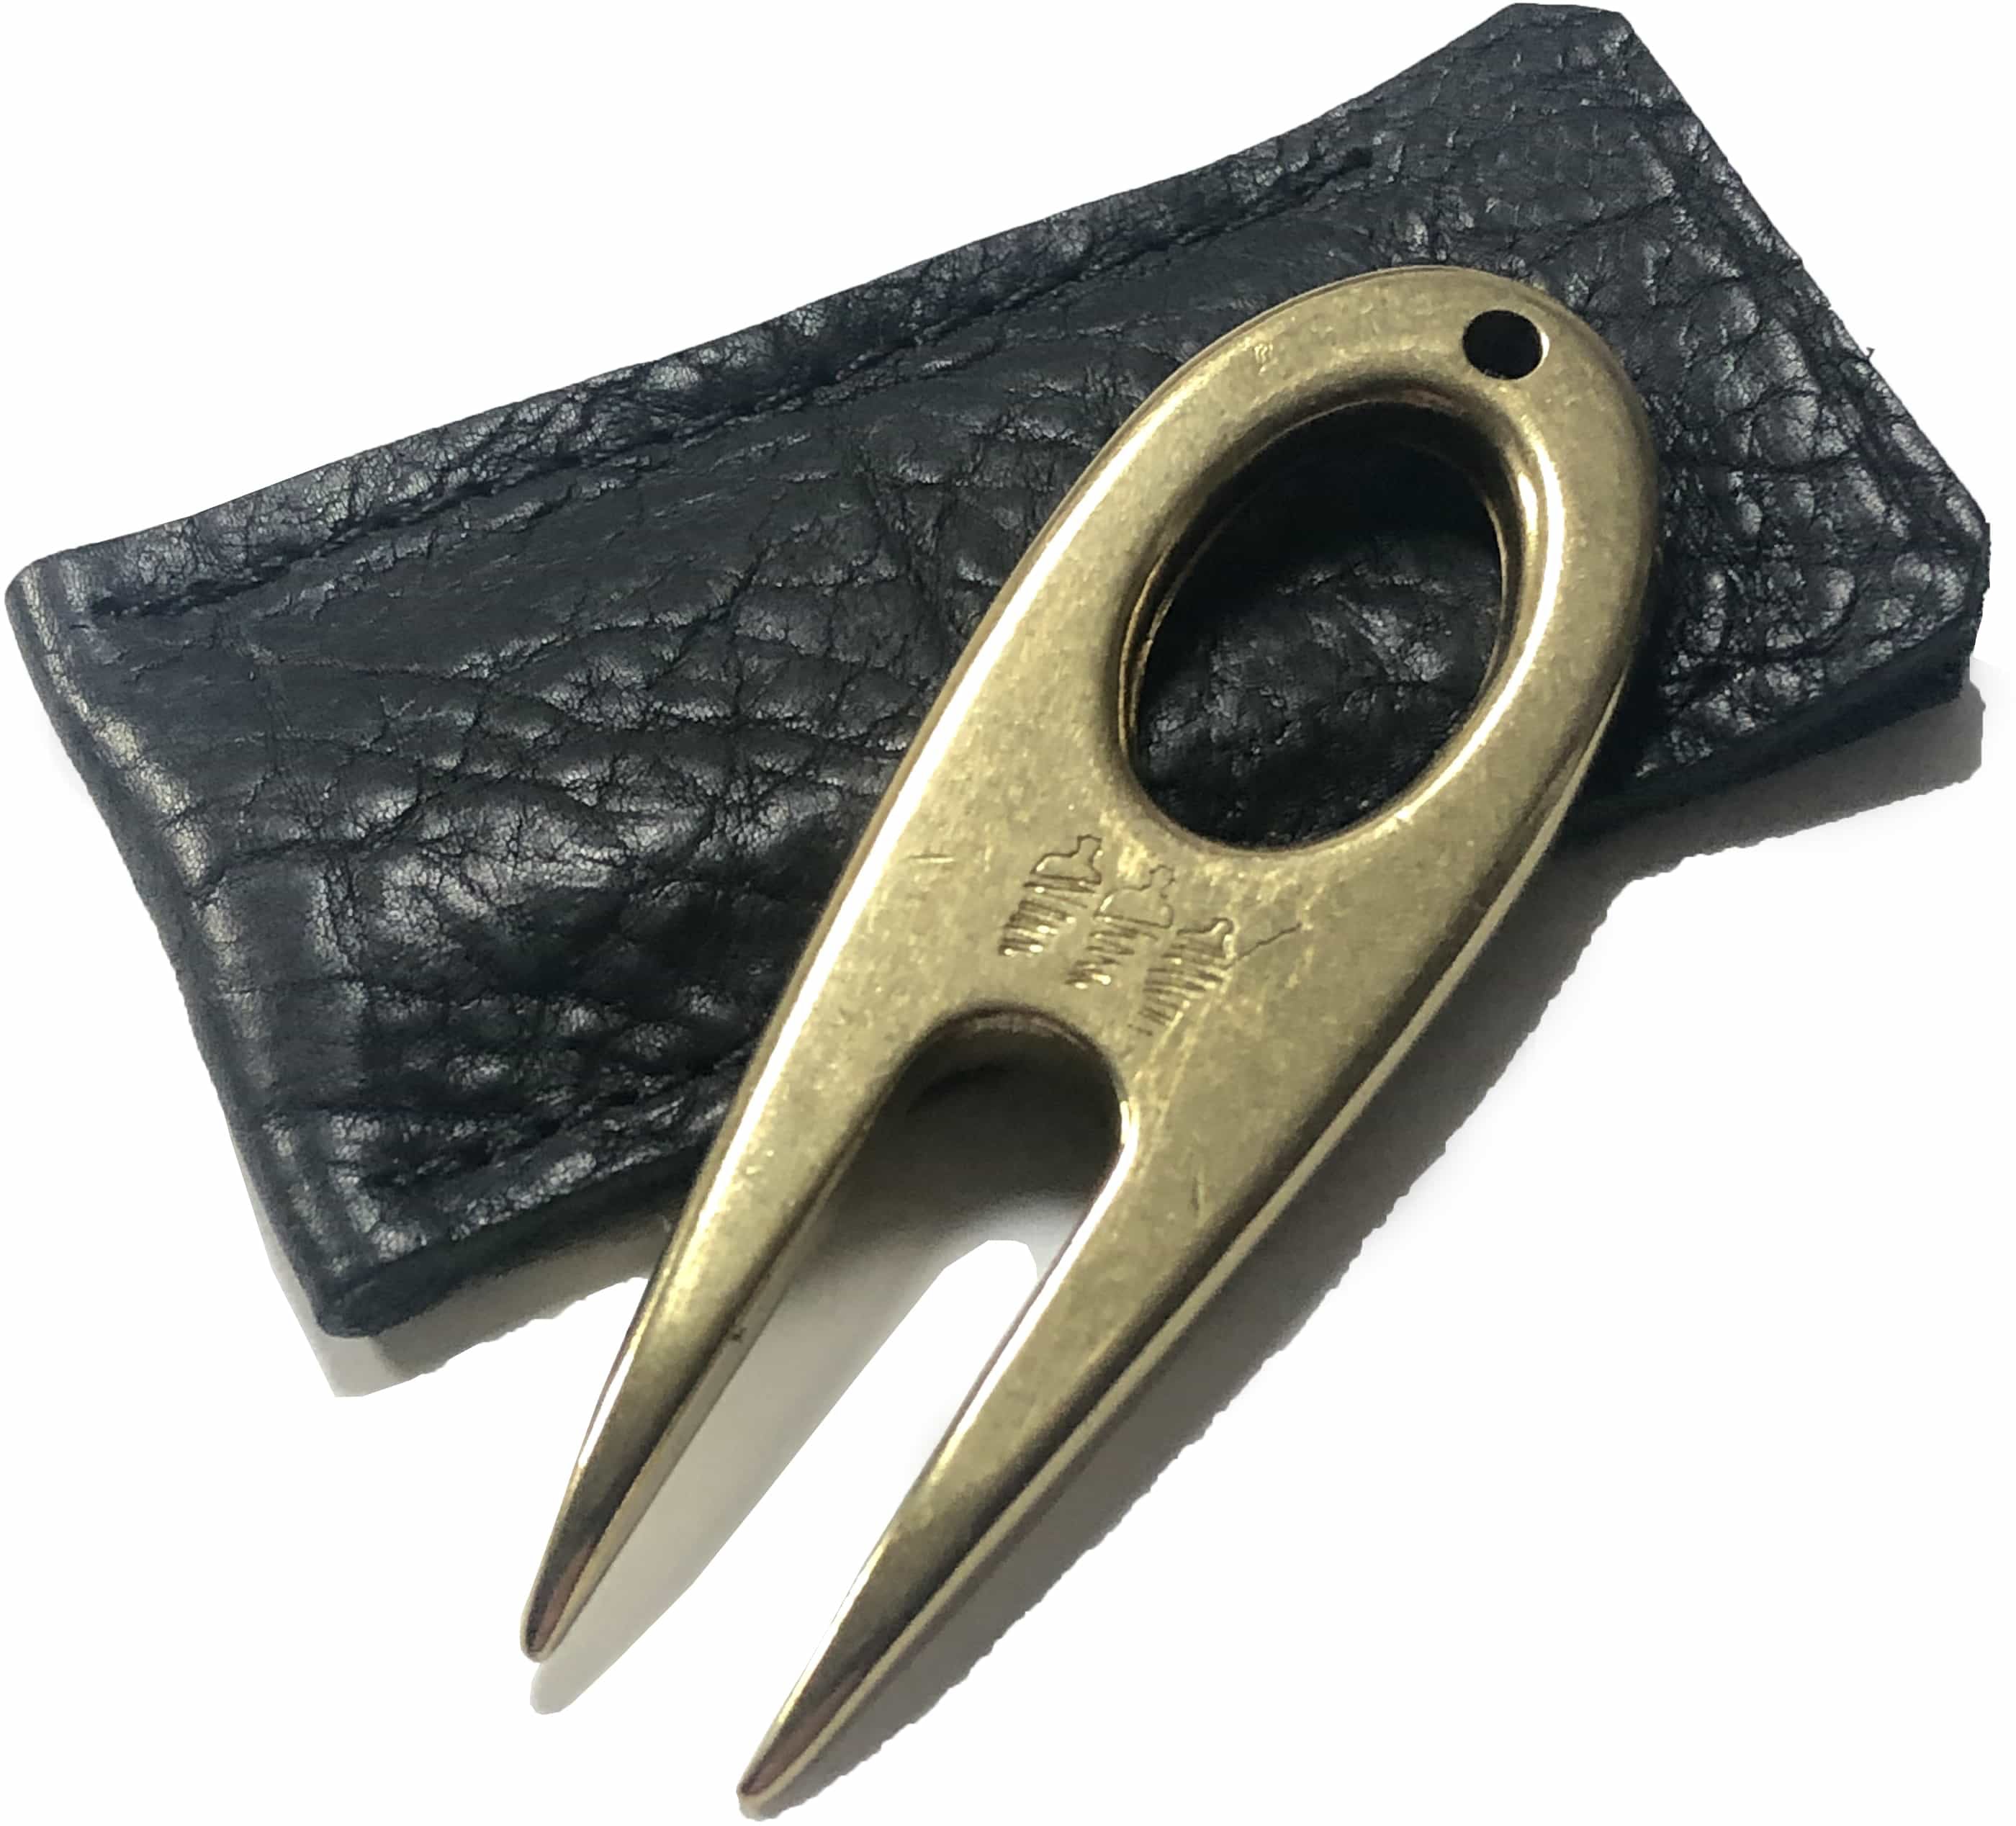 Golf divot tool solid brass with black bison leather sleeve, showing the color.